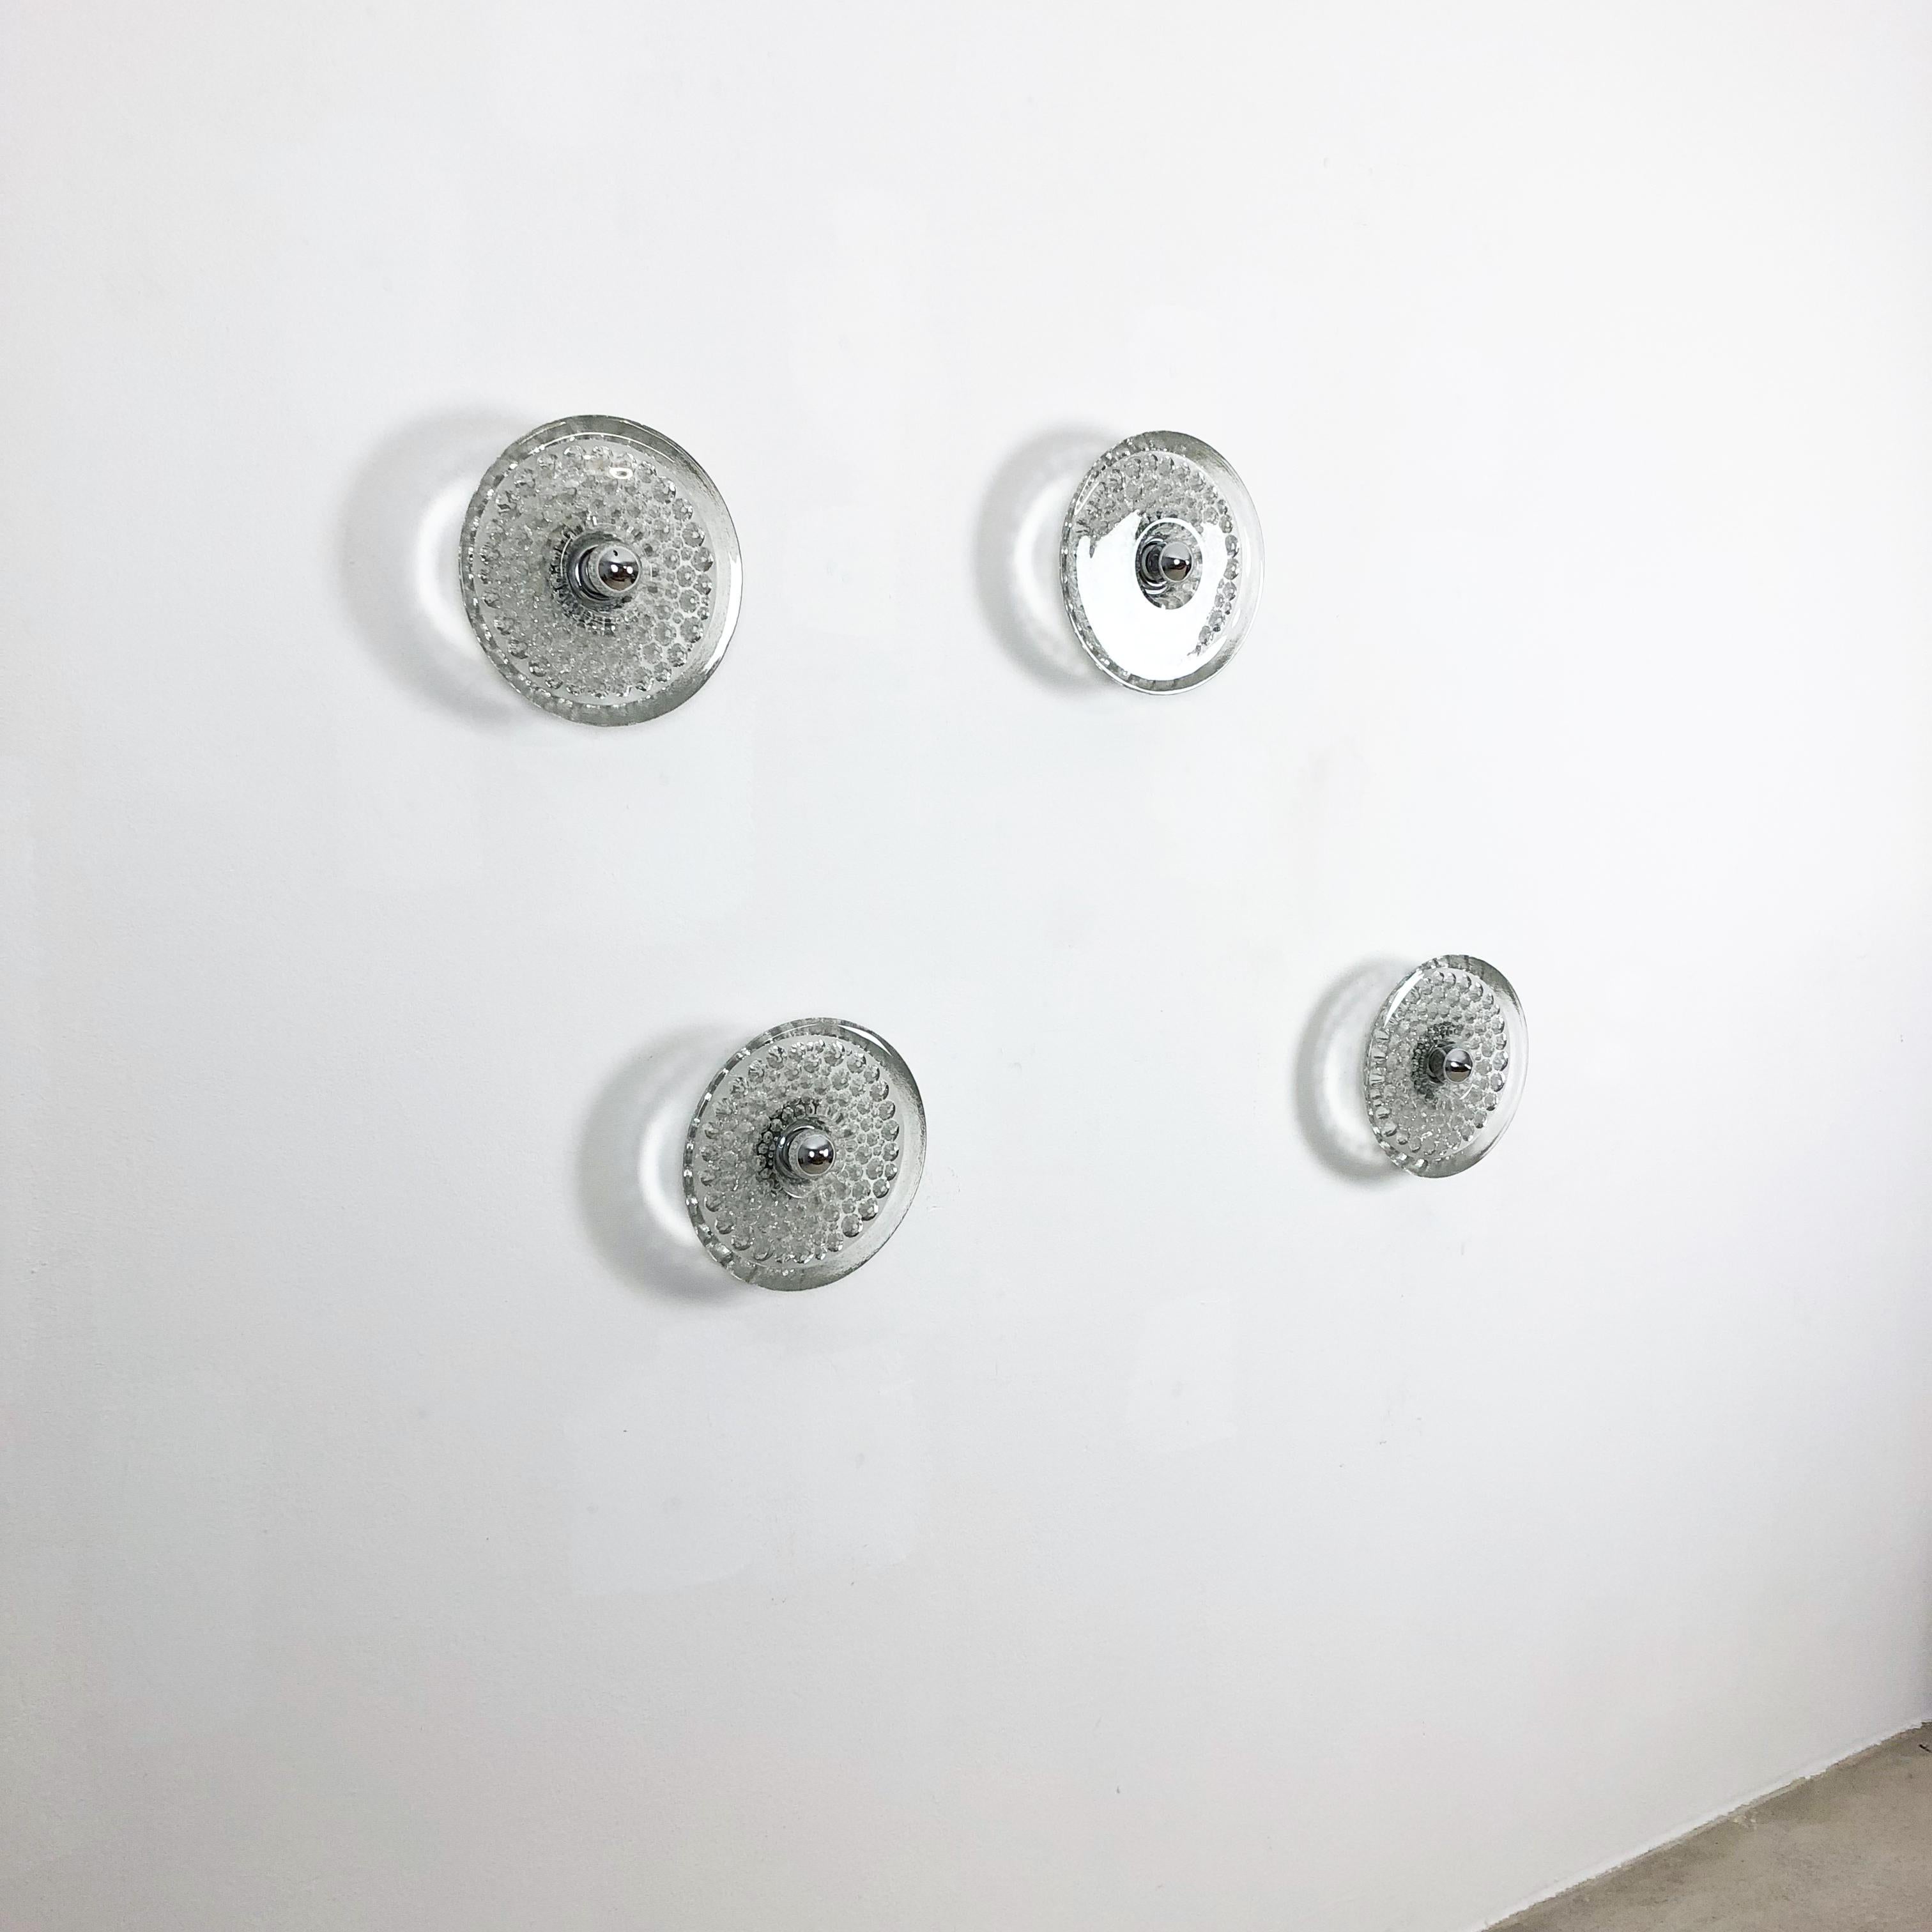 Article:

wall light set of four


Producer:

Peill and Putzler, Germany


Origin:

Germany



Age:

1970s



Original 1970s modernist German wall Light set made of glass and metal. These super rare wall lights were produced in